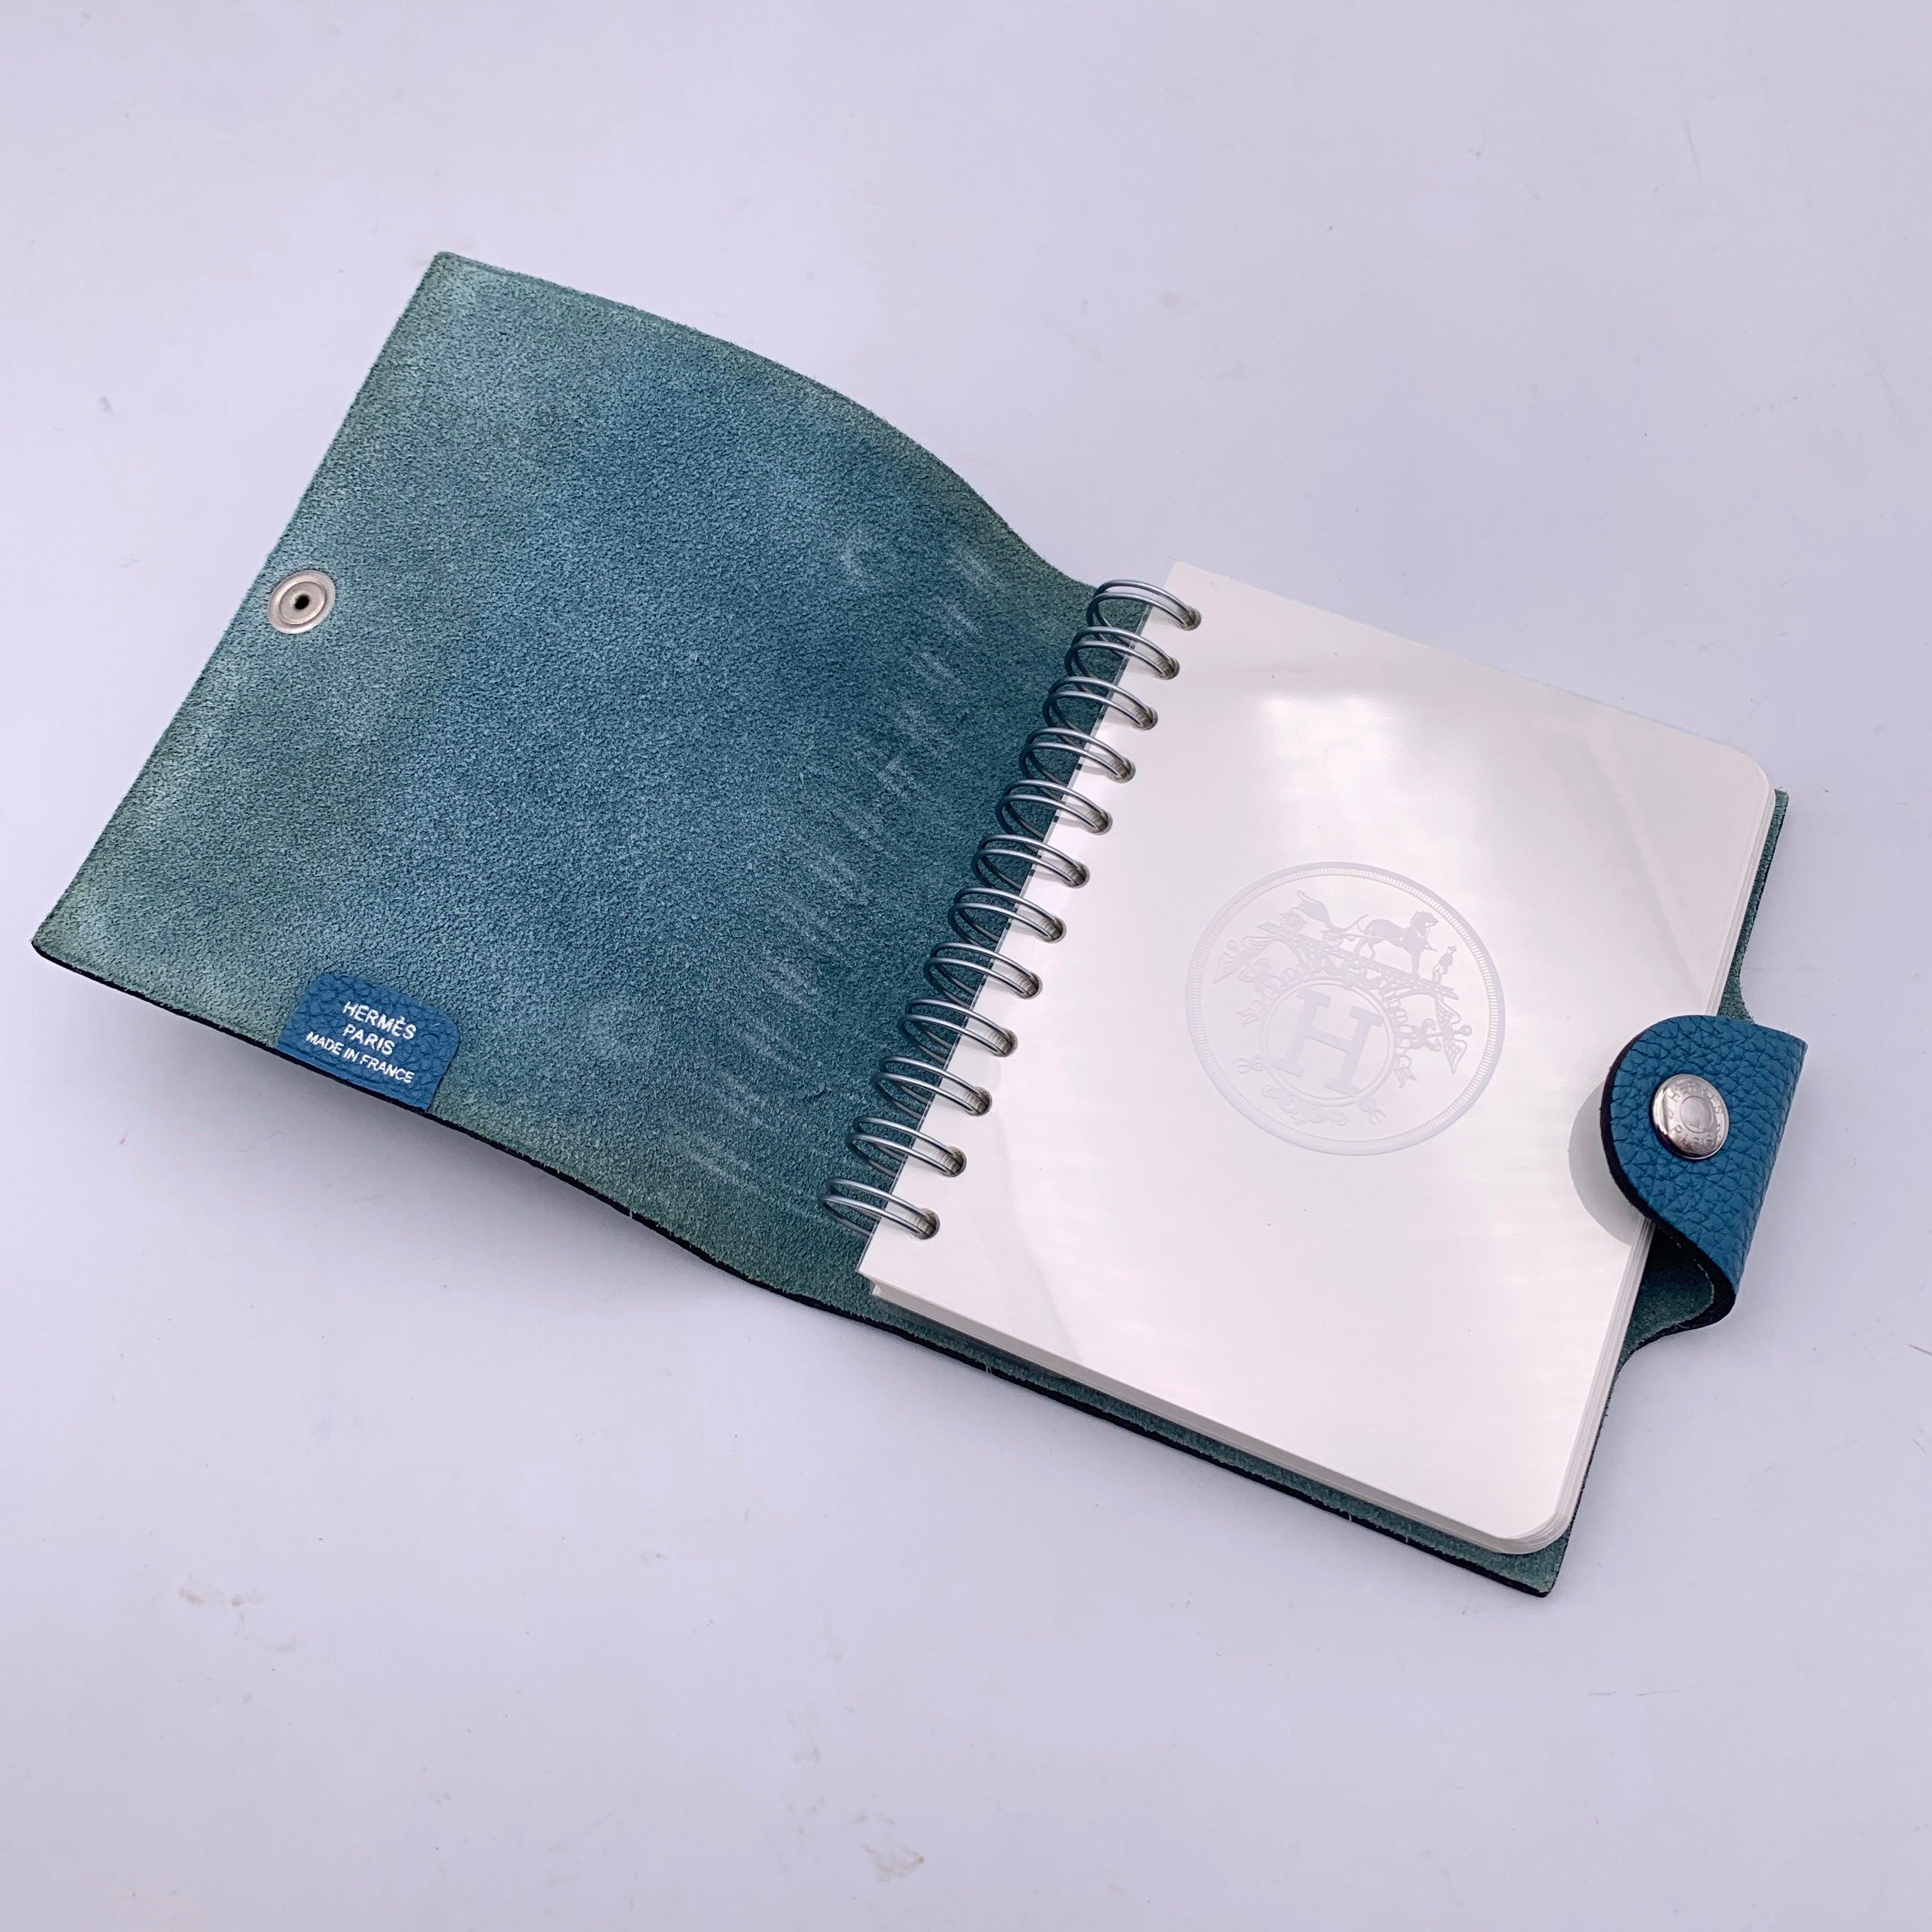 Hermes Blue Togo Leather Ulysse Mini Notebook cover with Refill In Excellent Condition For Sale In Rome, Rome